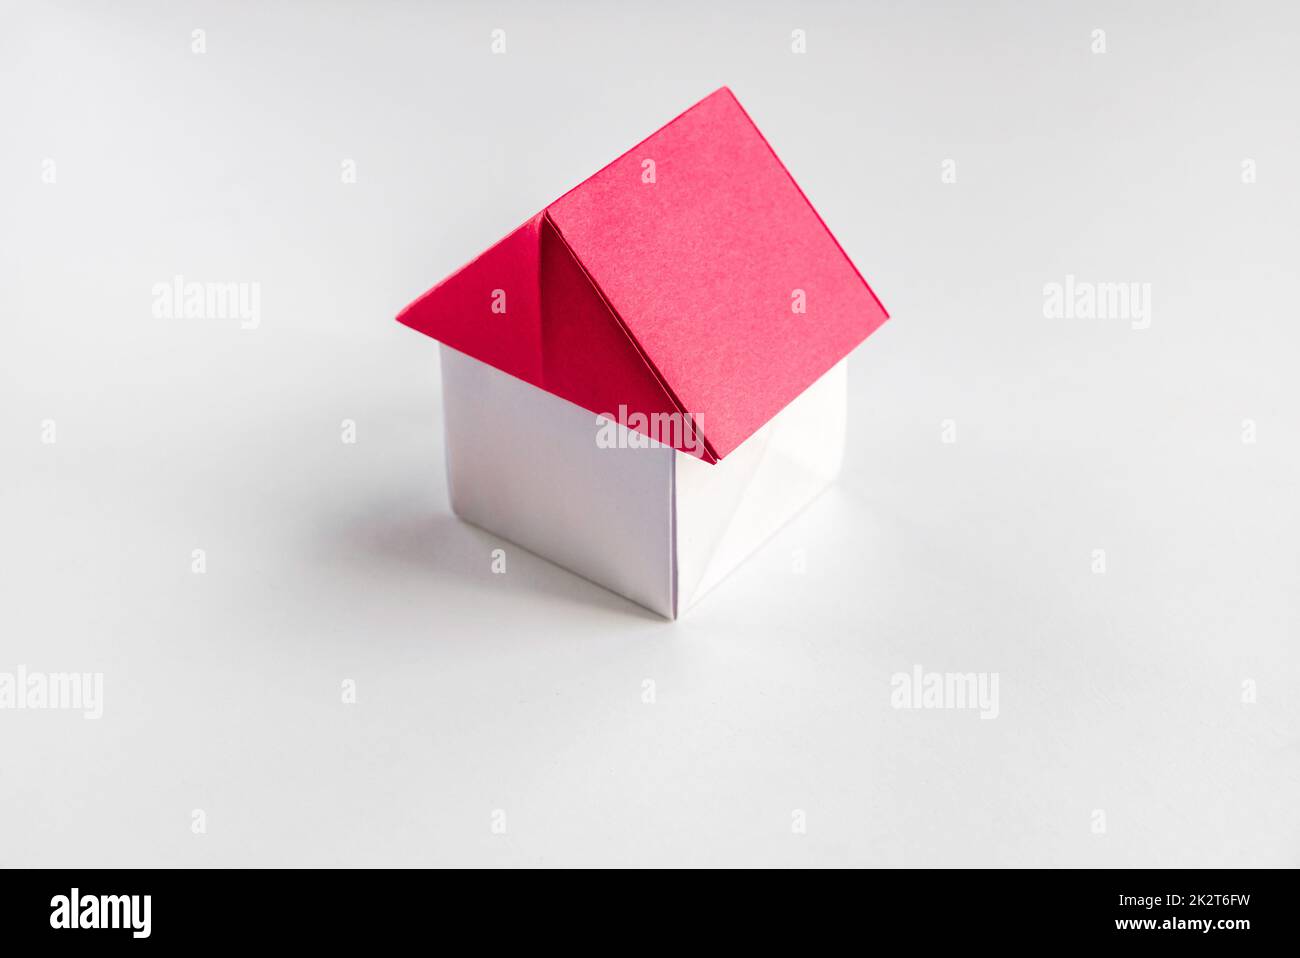 White and red paper house origami isolated on blank background Stock Photo